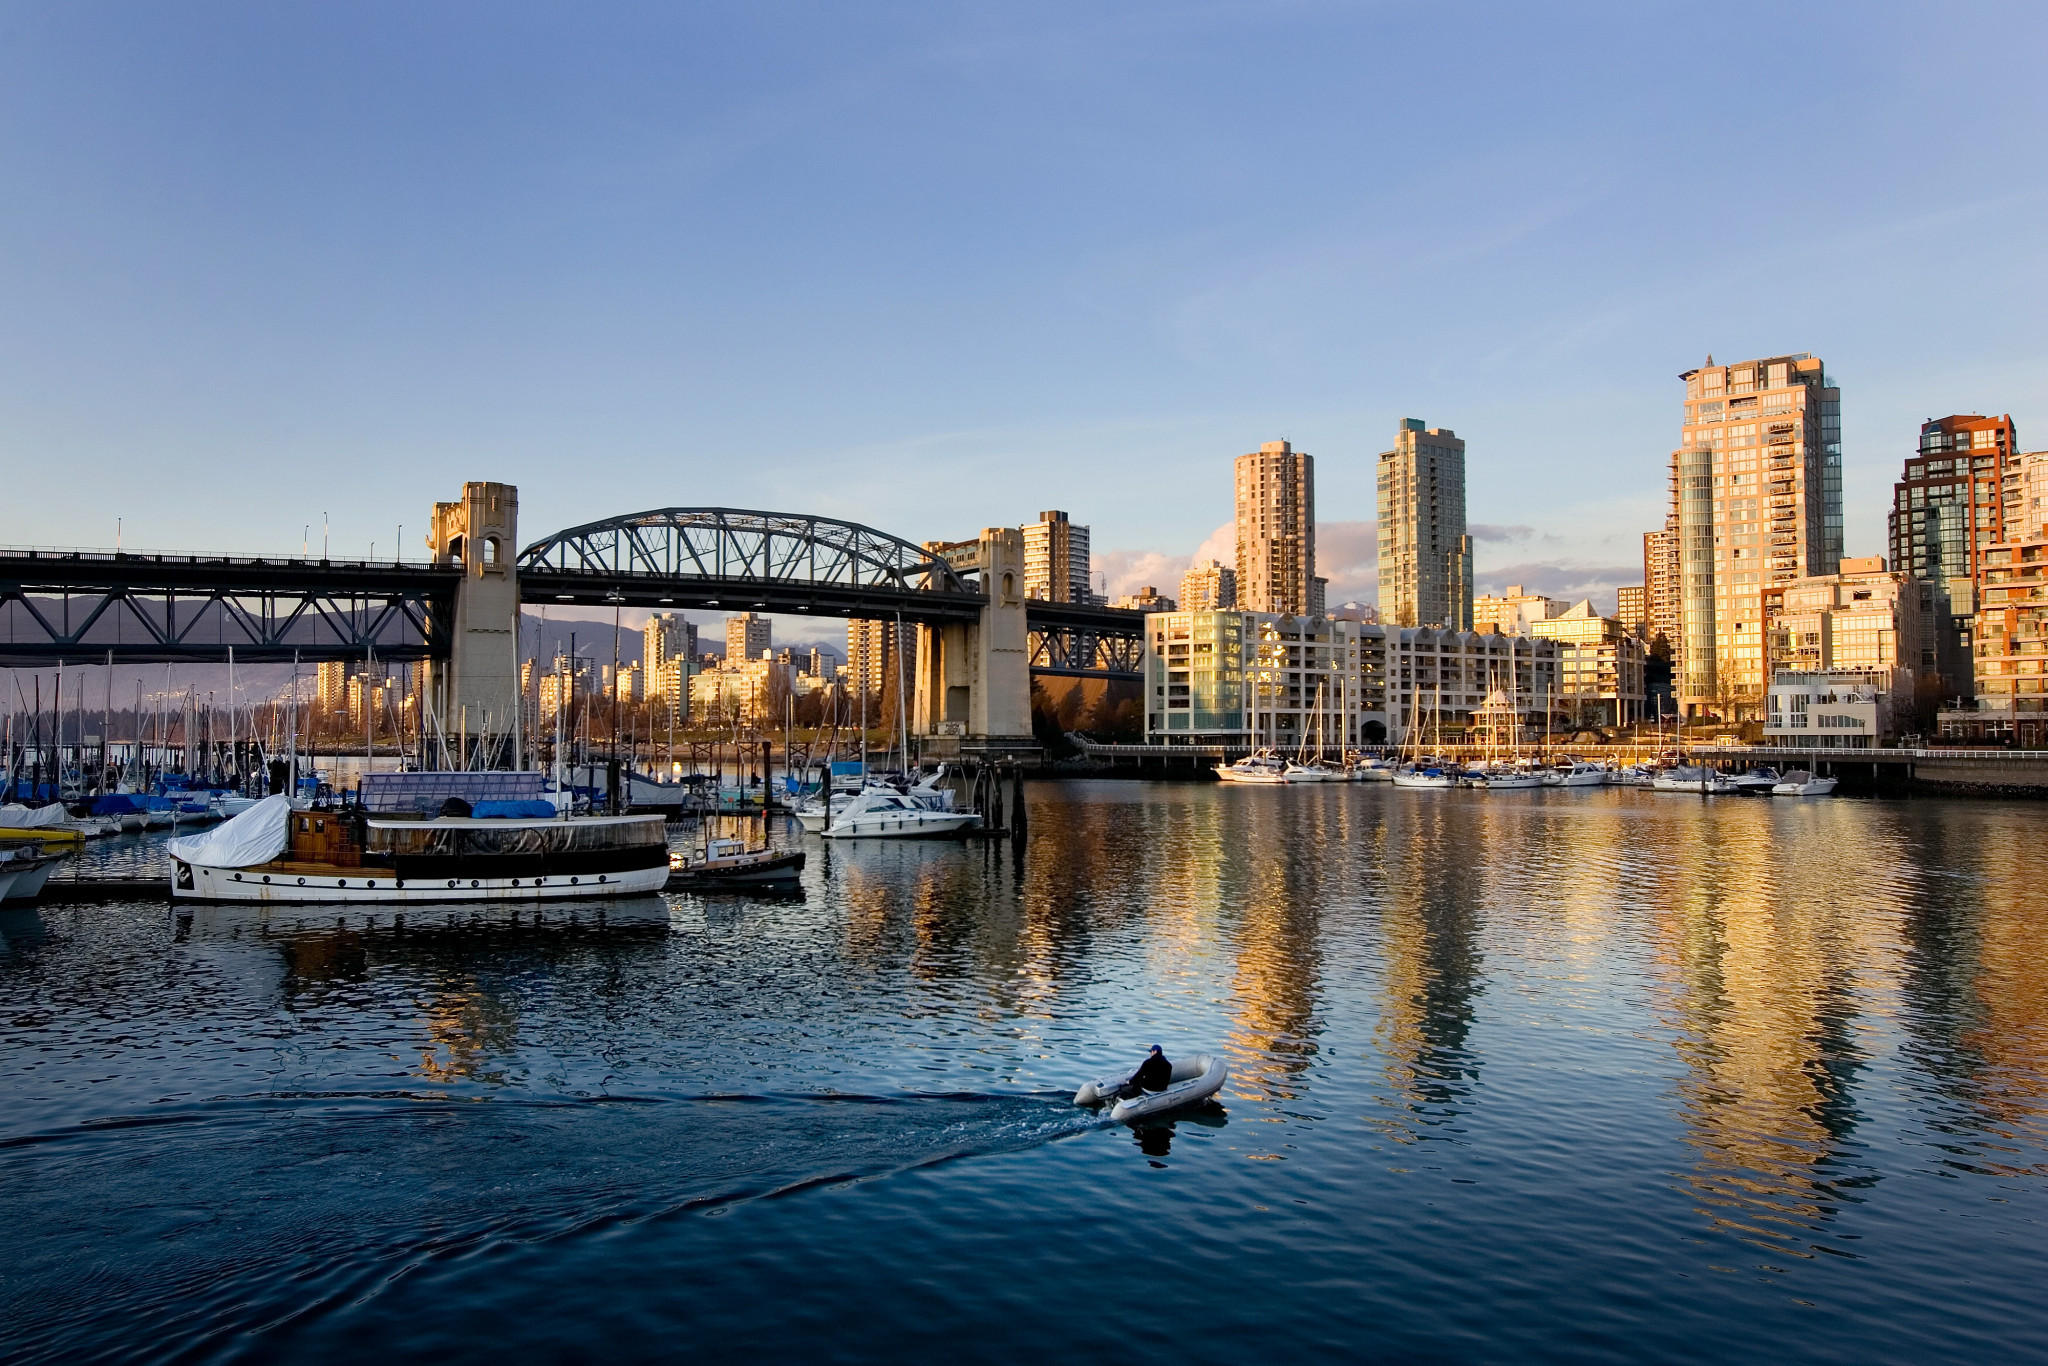 Council report casts doubt over Vancouver bid for 2030 Winter Olympics